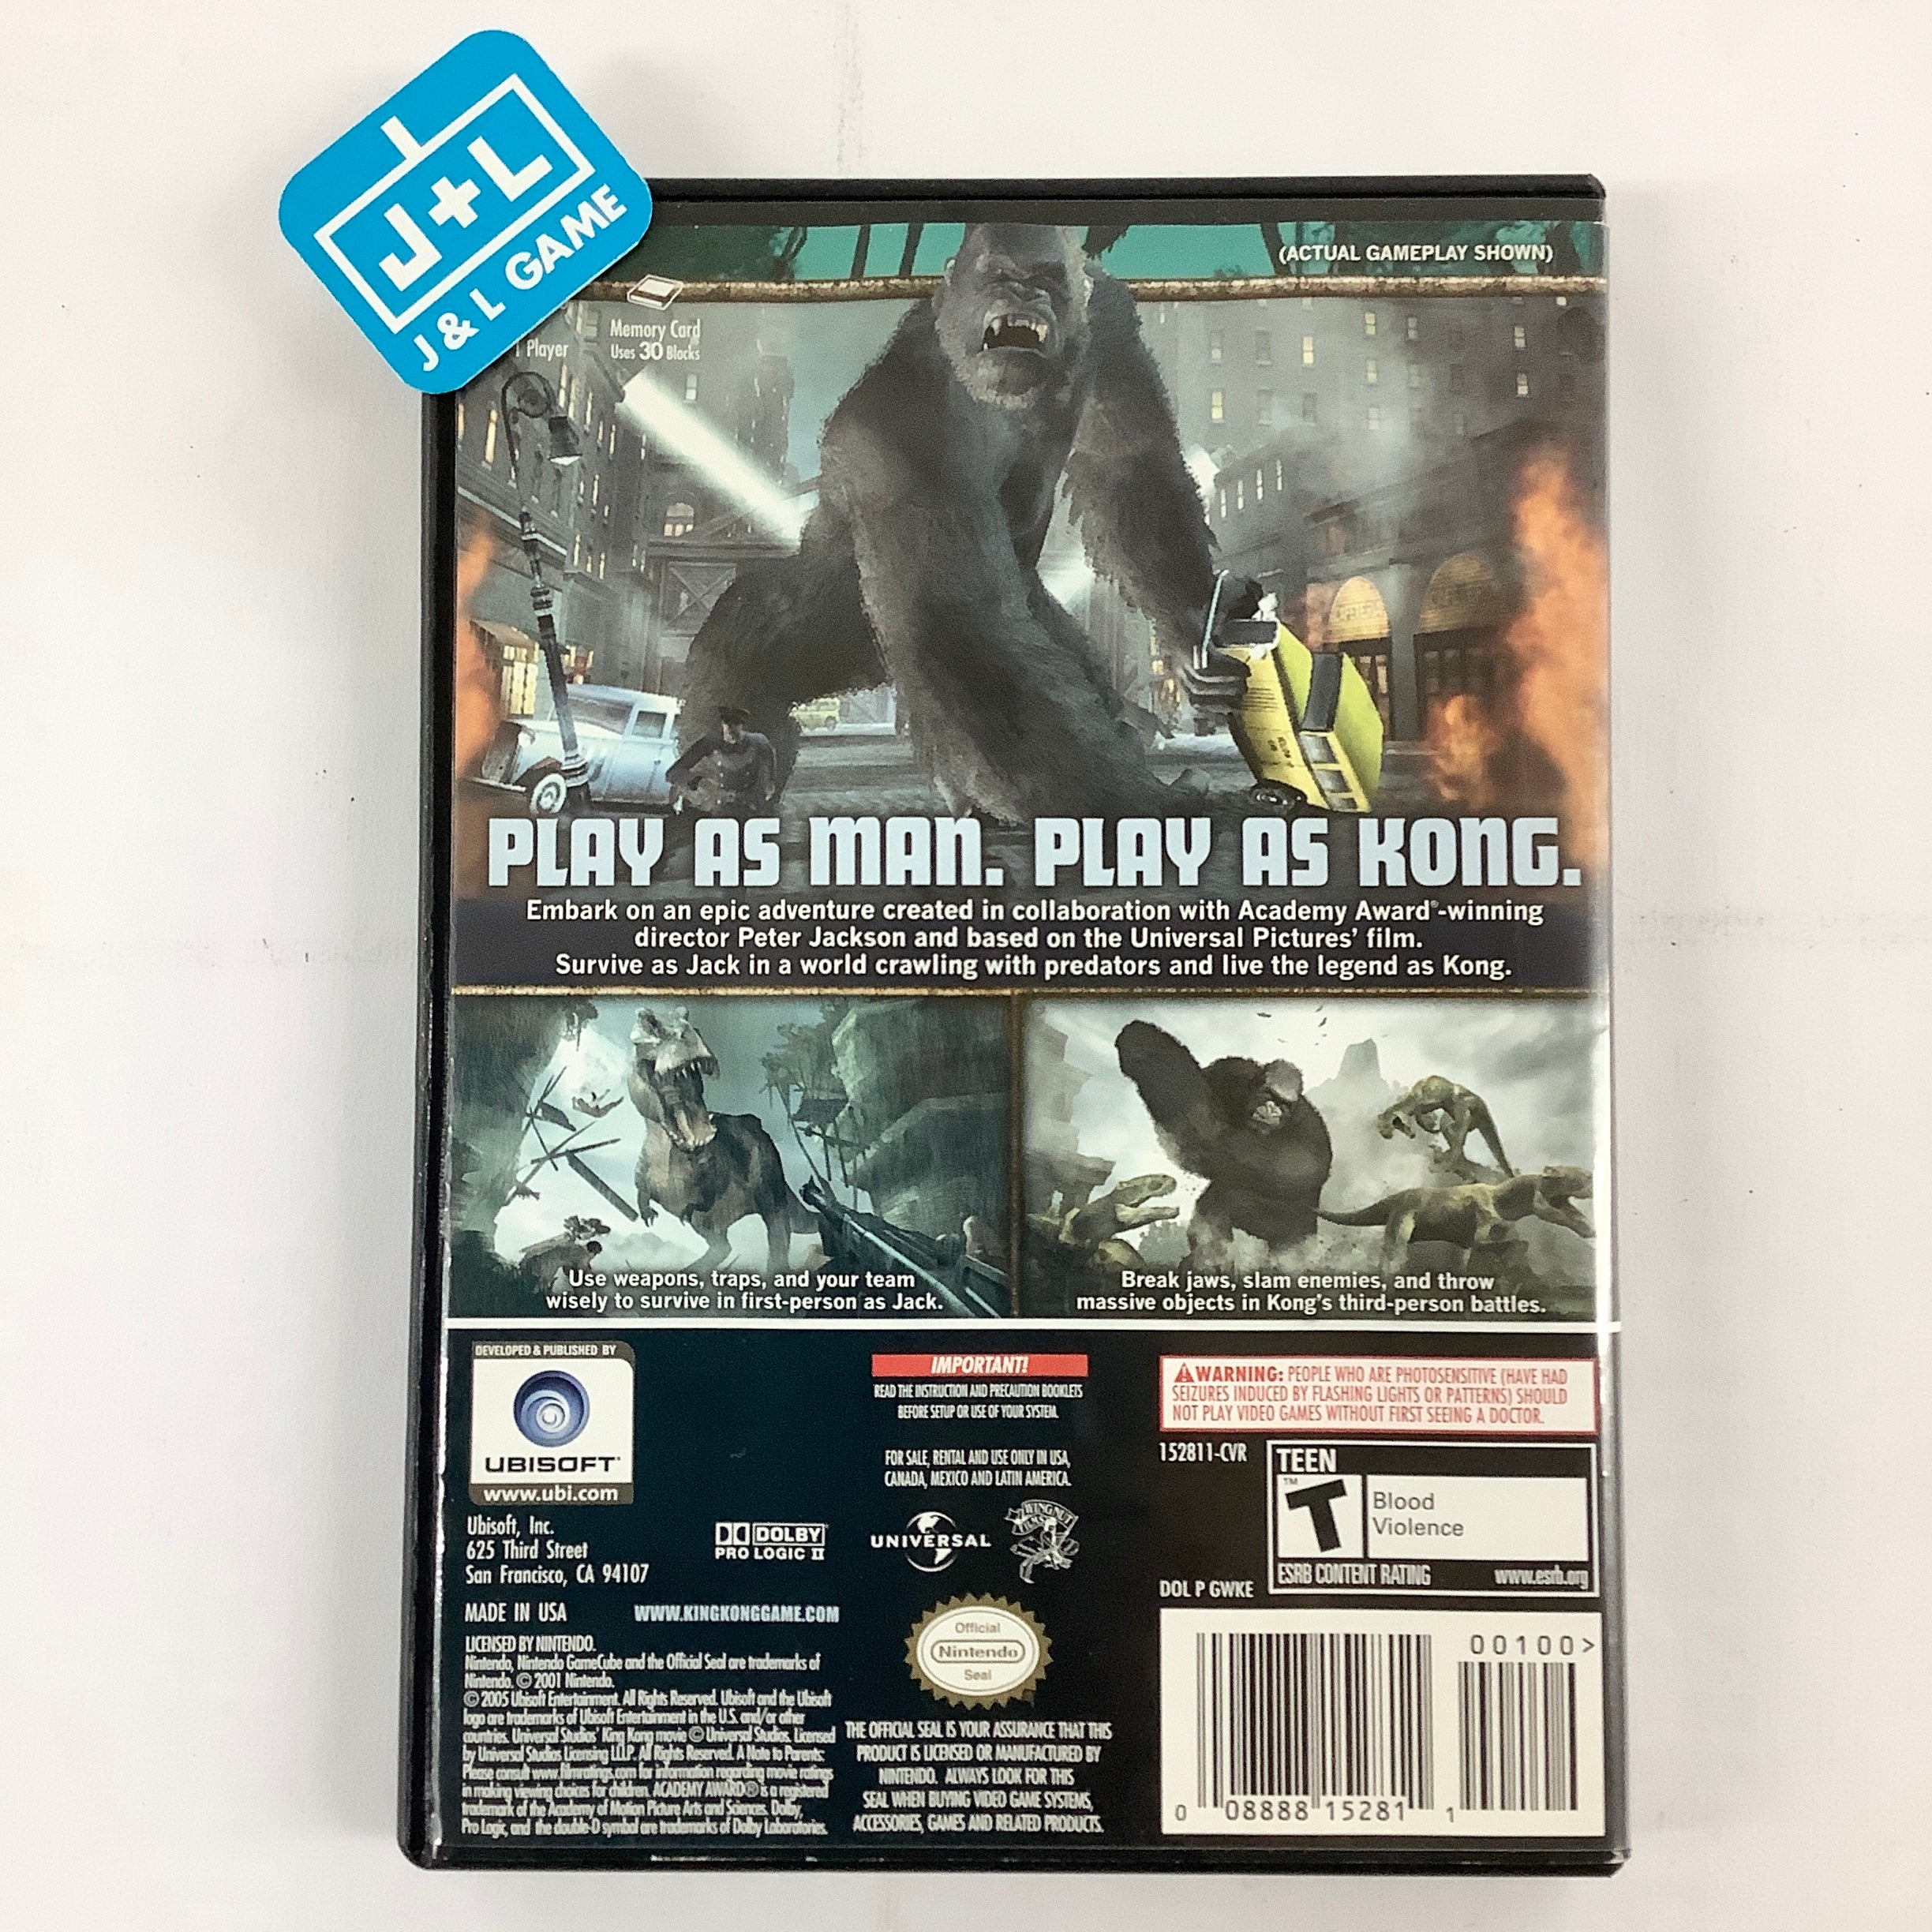 Peter Jackson's King Kong: The Official Game of the Movie - (GC) GameCube [Pre-Owned] Video Games Ubisoft   